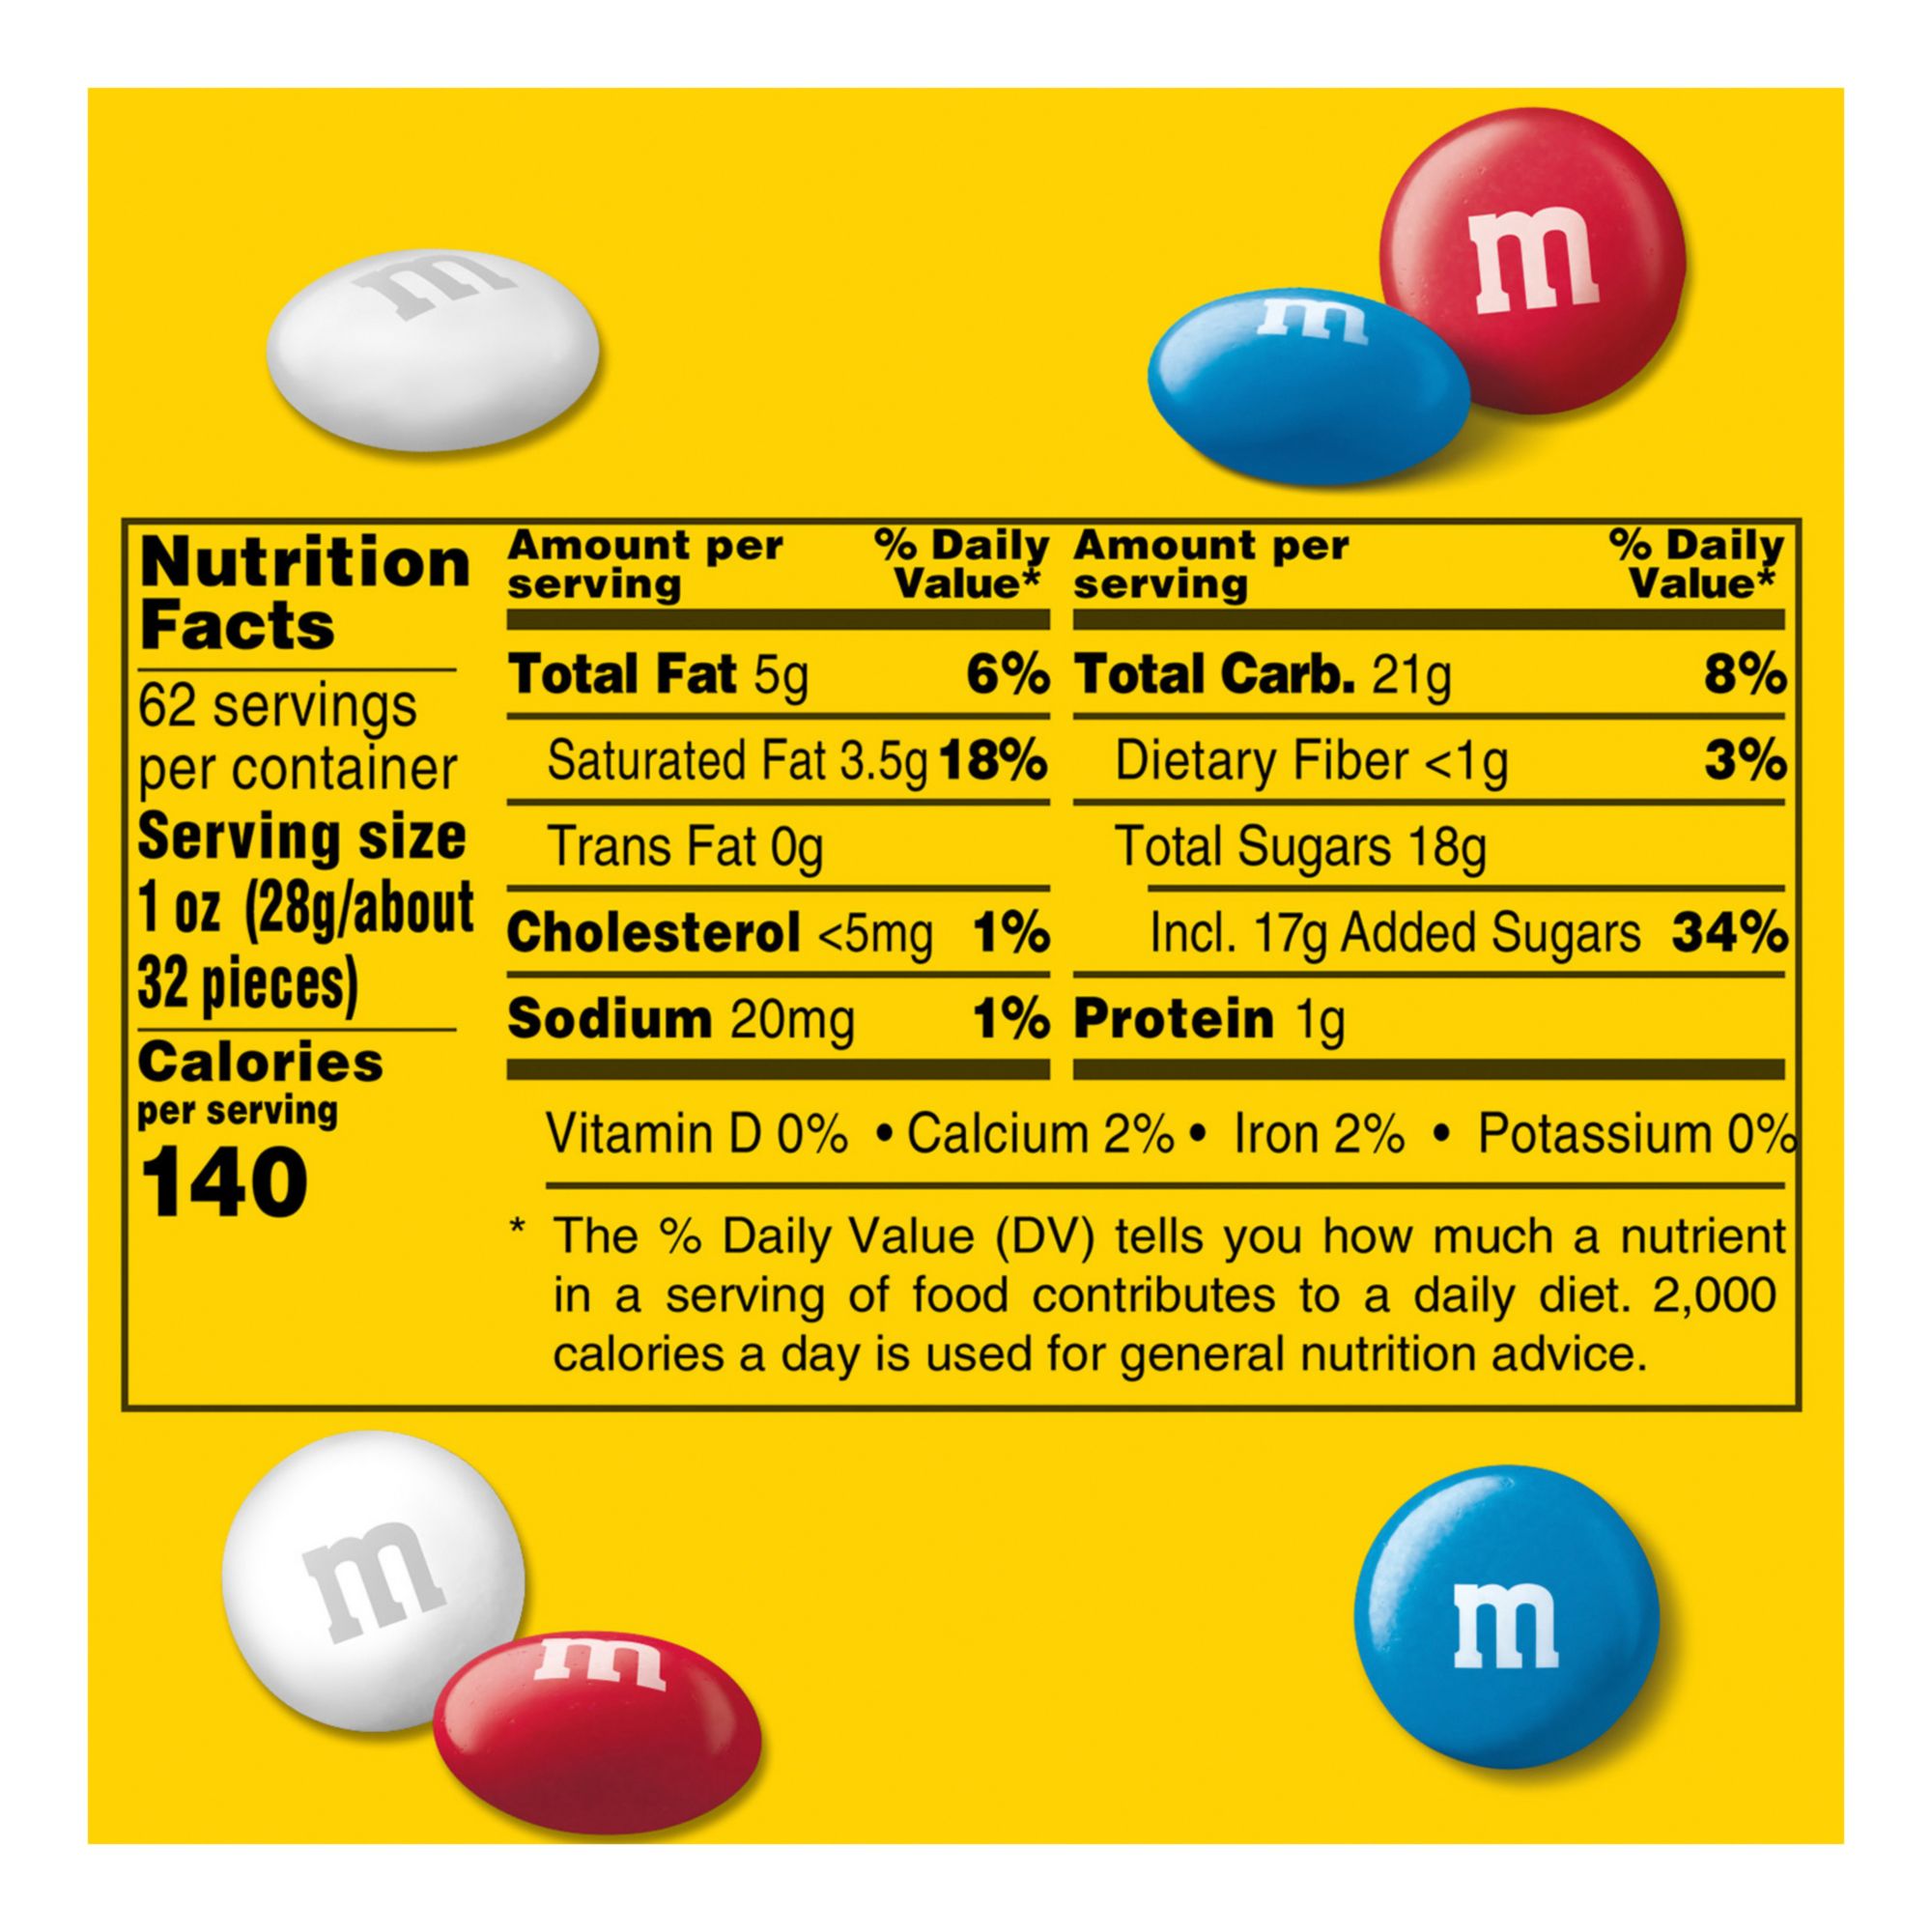 M&M's Red, White & Blue Mix Milk Chocolate Candy Value Pack, 62 oz. ( 1 Pack )